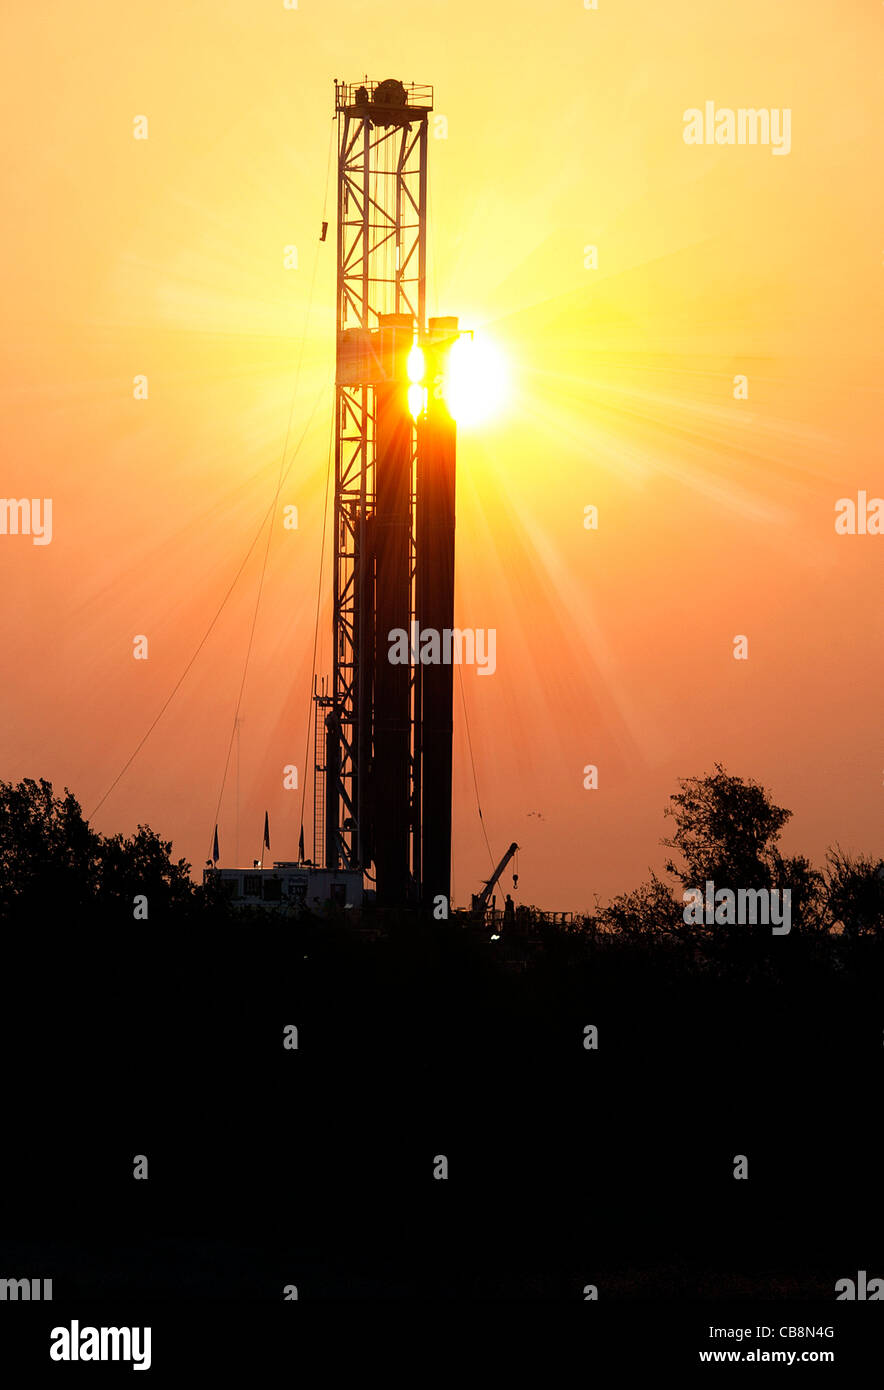 Drilling rig in Texas as sun rises, energy products is the major export of the United States. Photo taken in north Texas Stock Photo